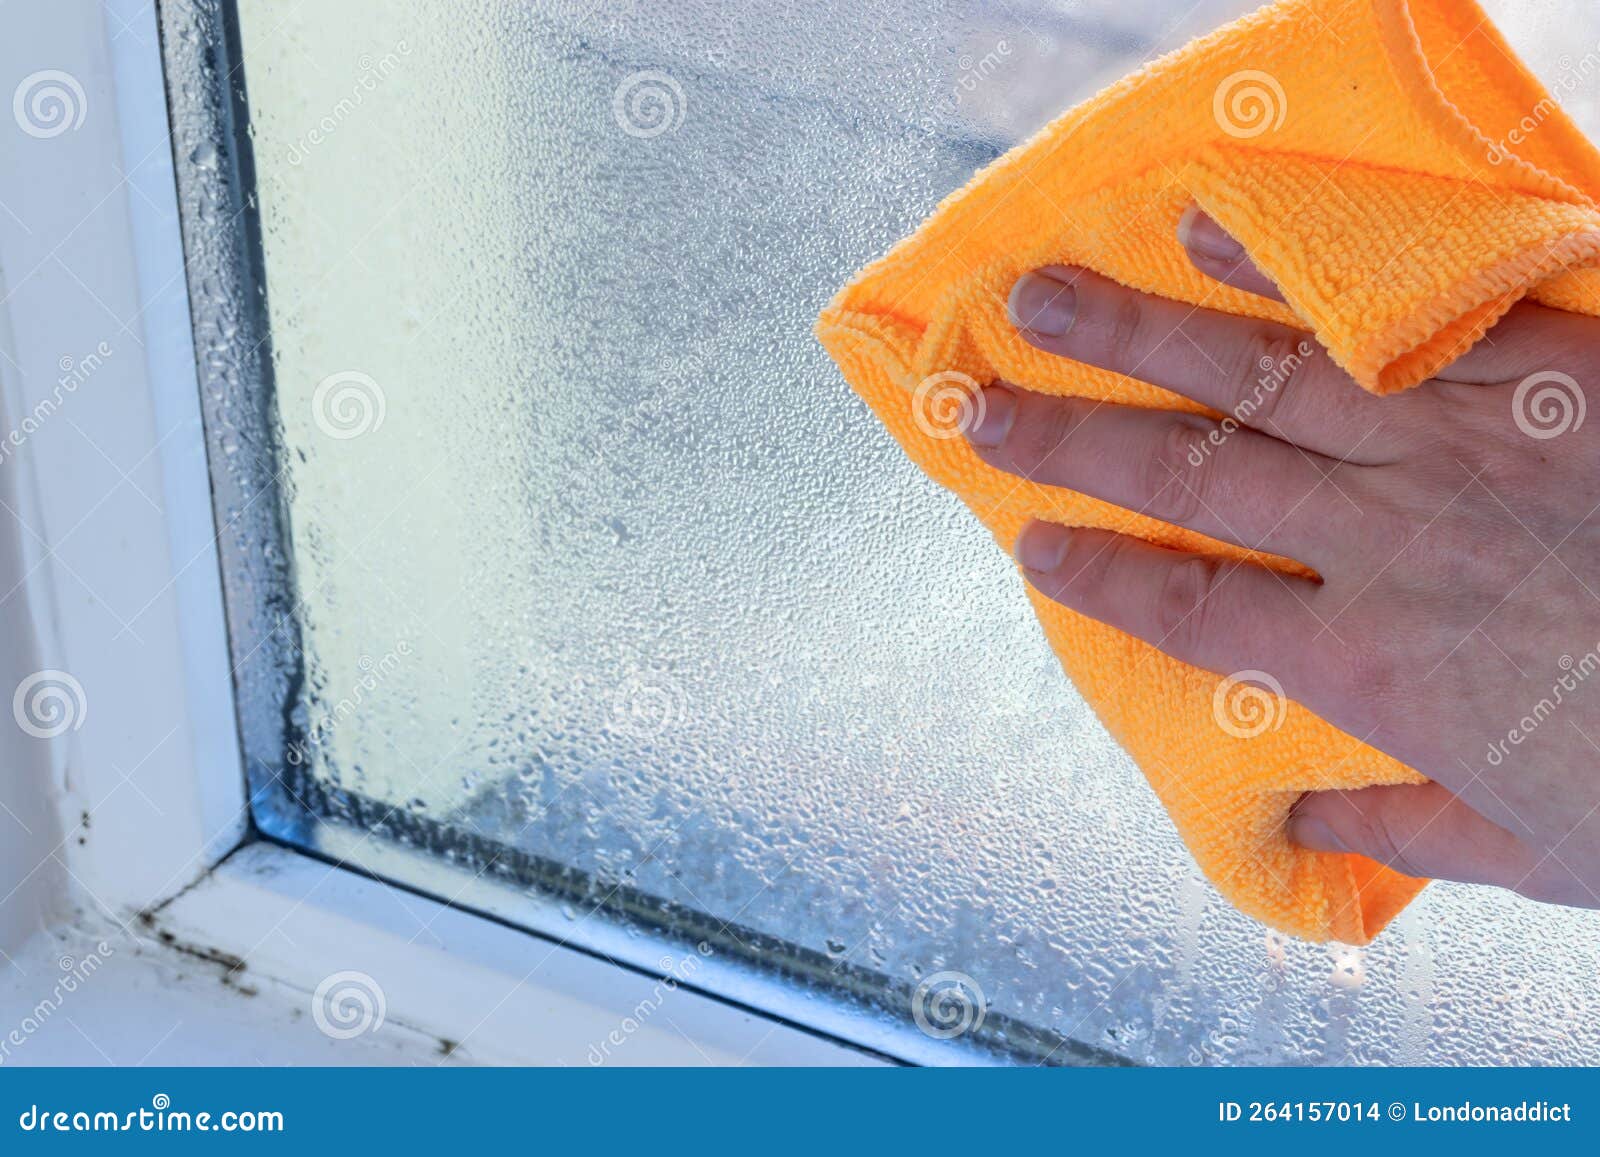 hand wipes off water condensation from plastic window glass in the room